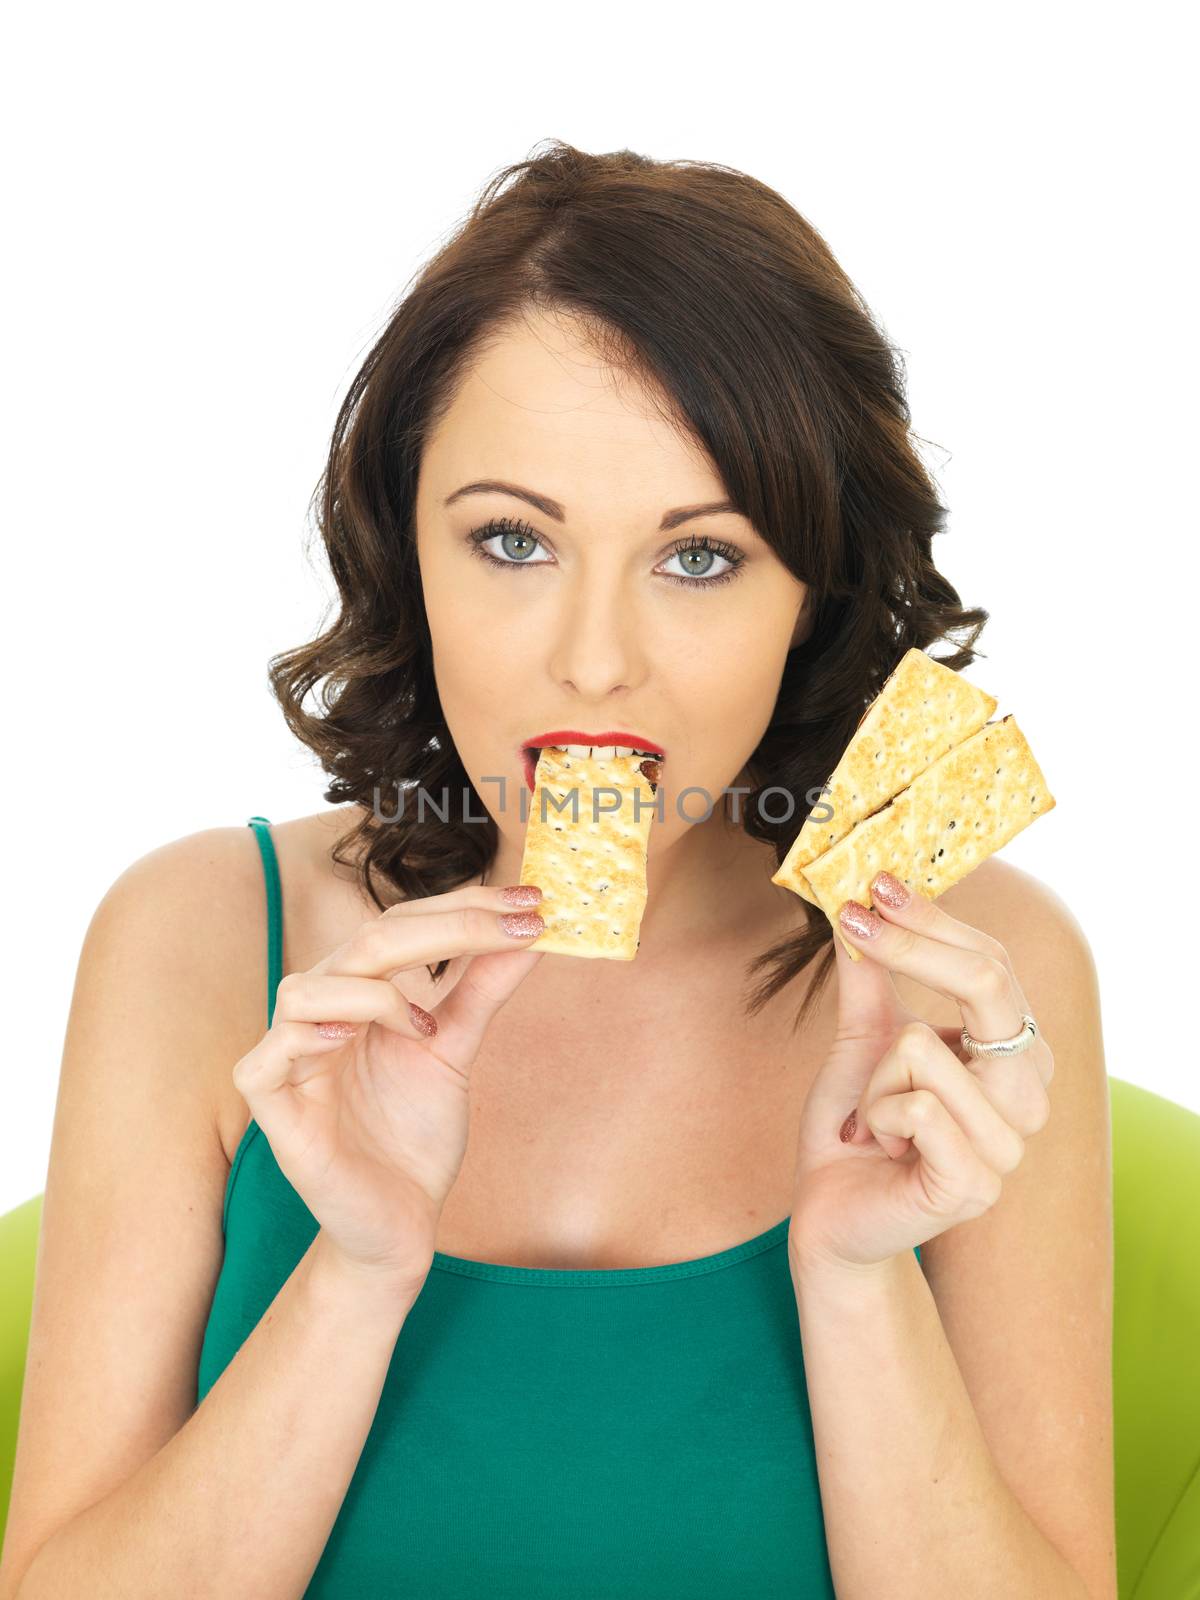 Young Woman Eating Crispy Thin Crackers by Whiteboxmedia